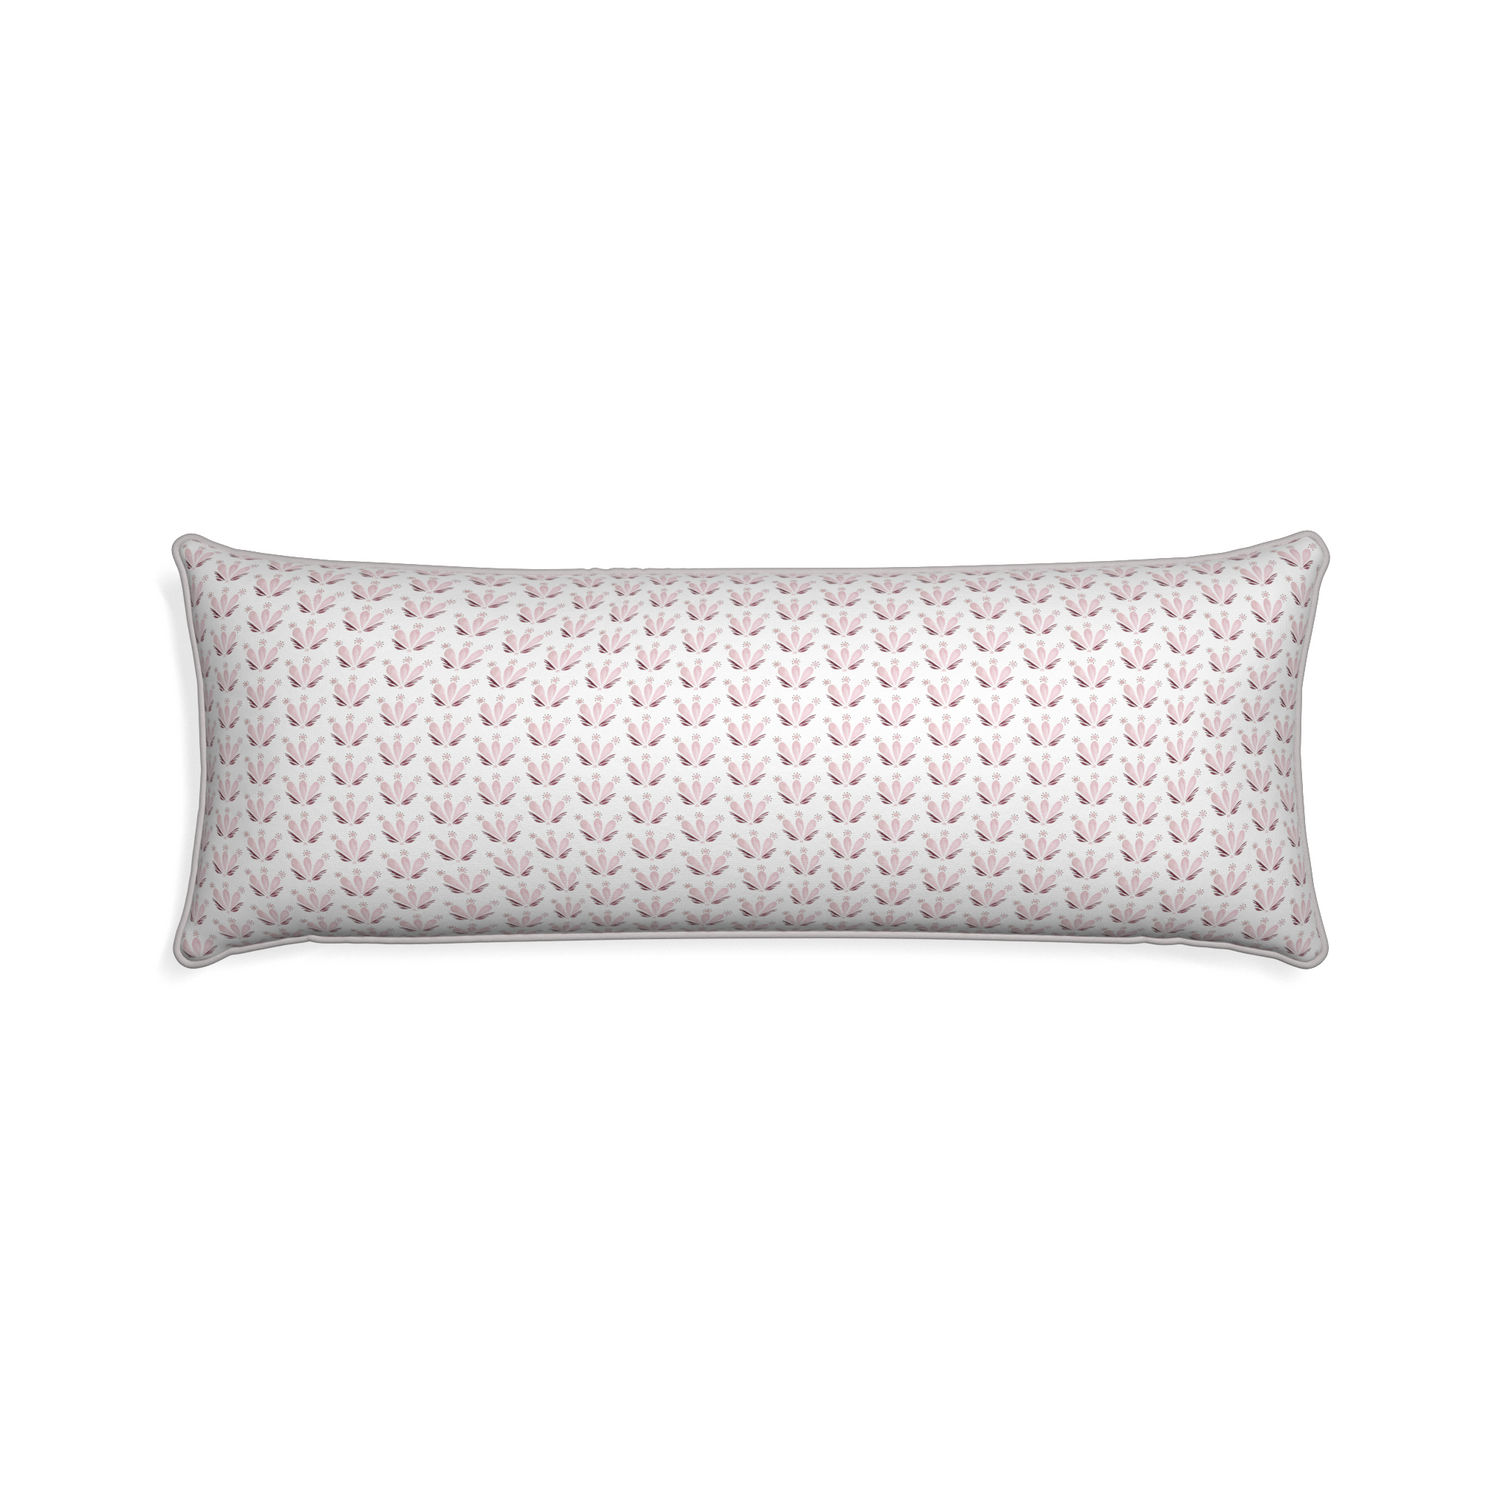 Xl-lumbar serena pink custom pink & burgundy drop repeat floralpillow with pebble piping on white background